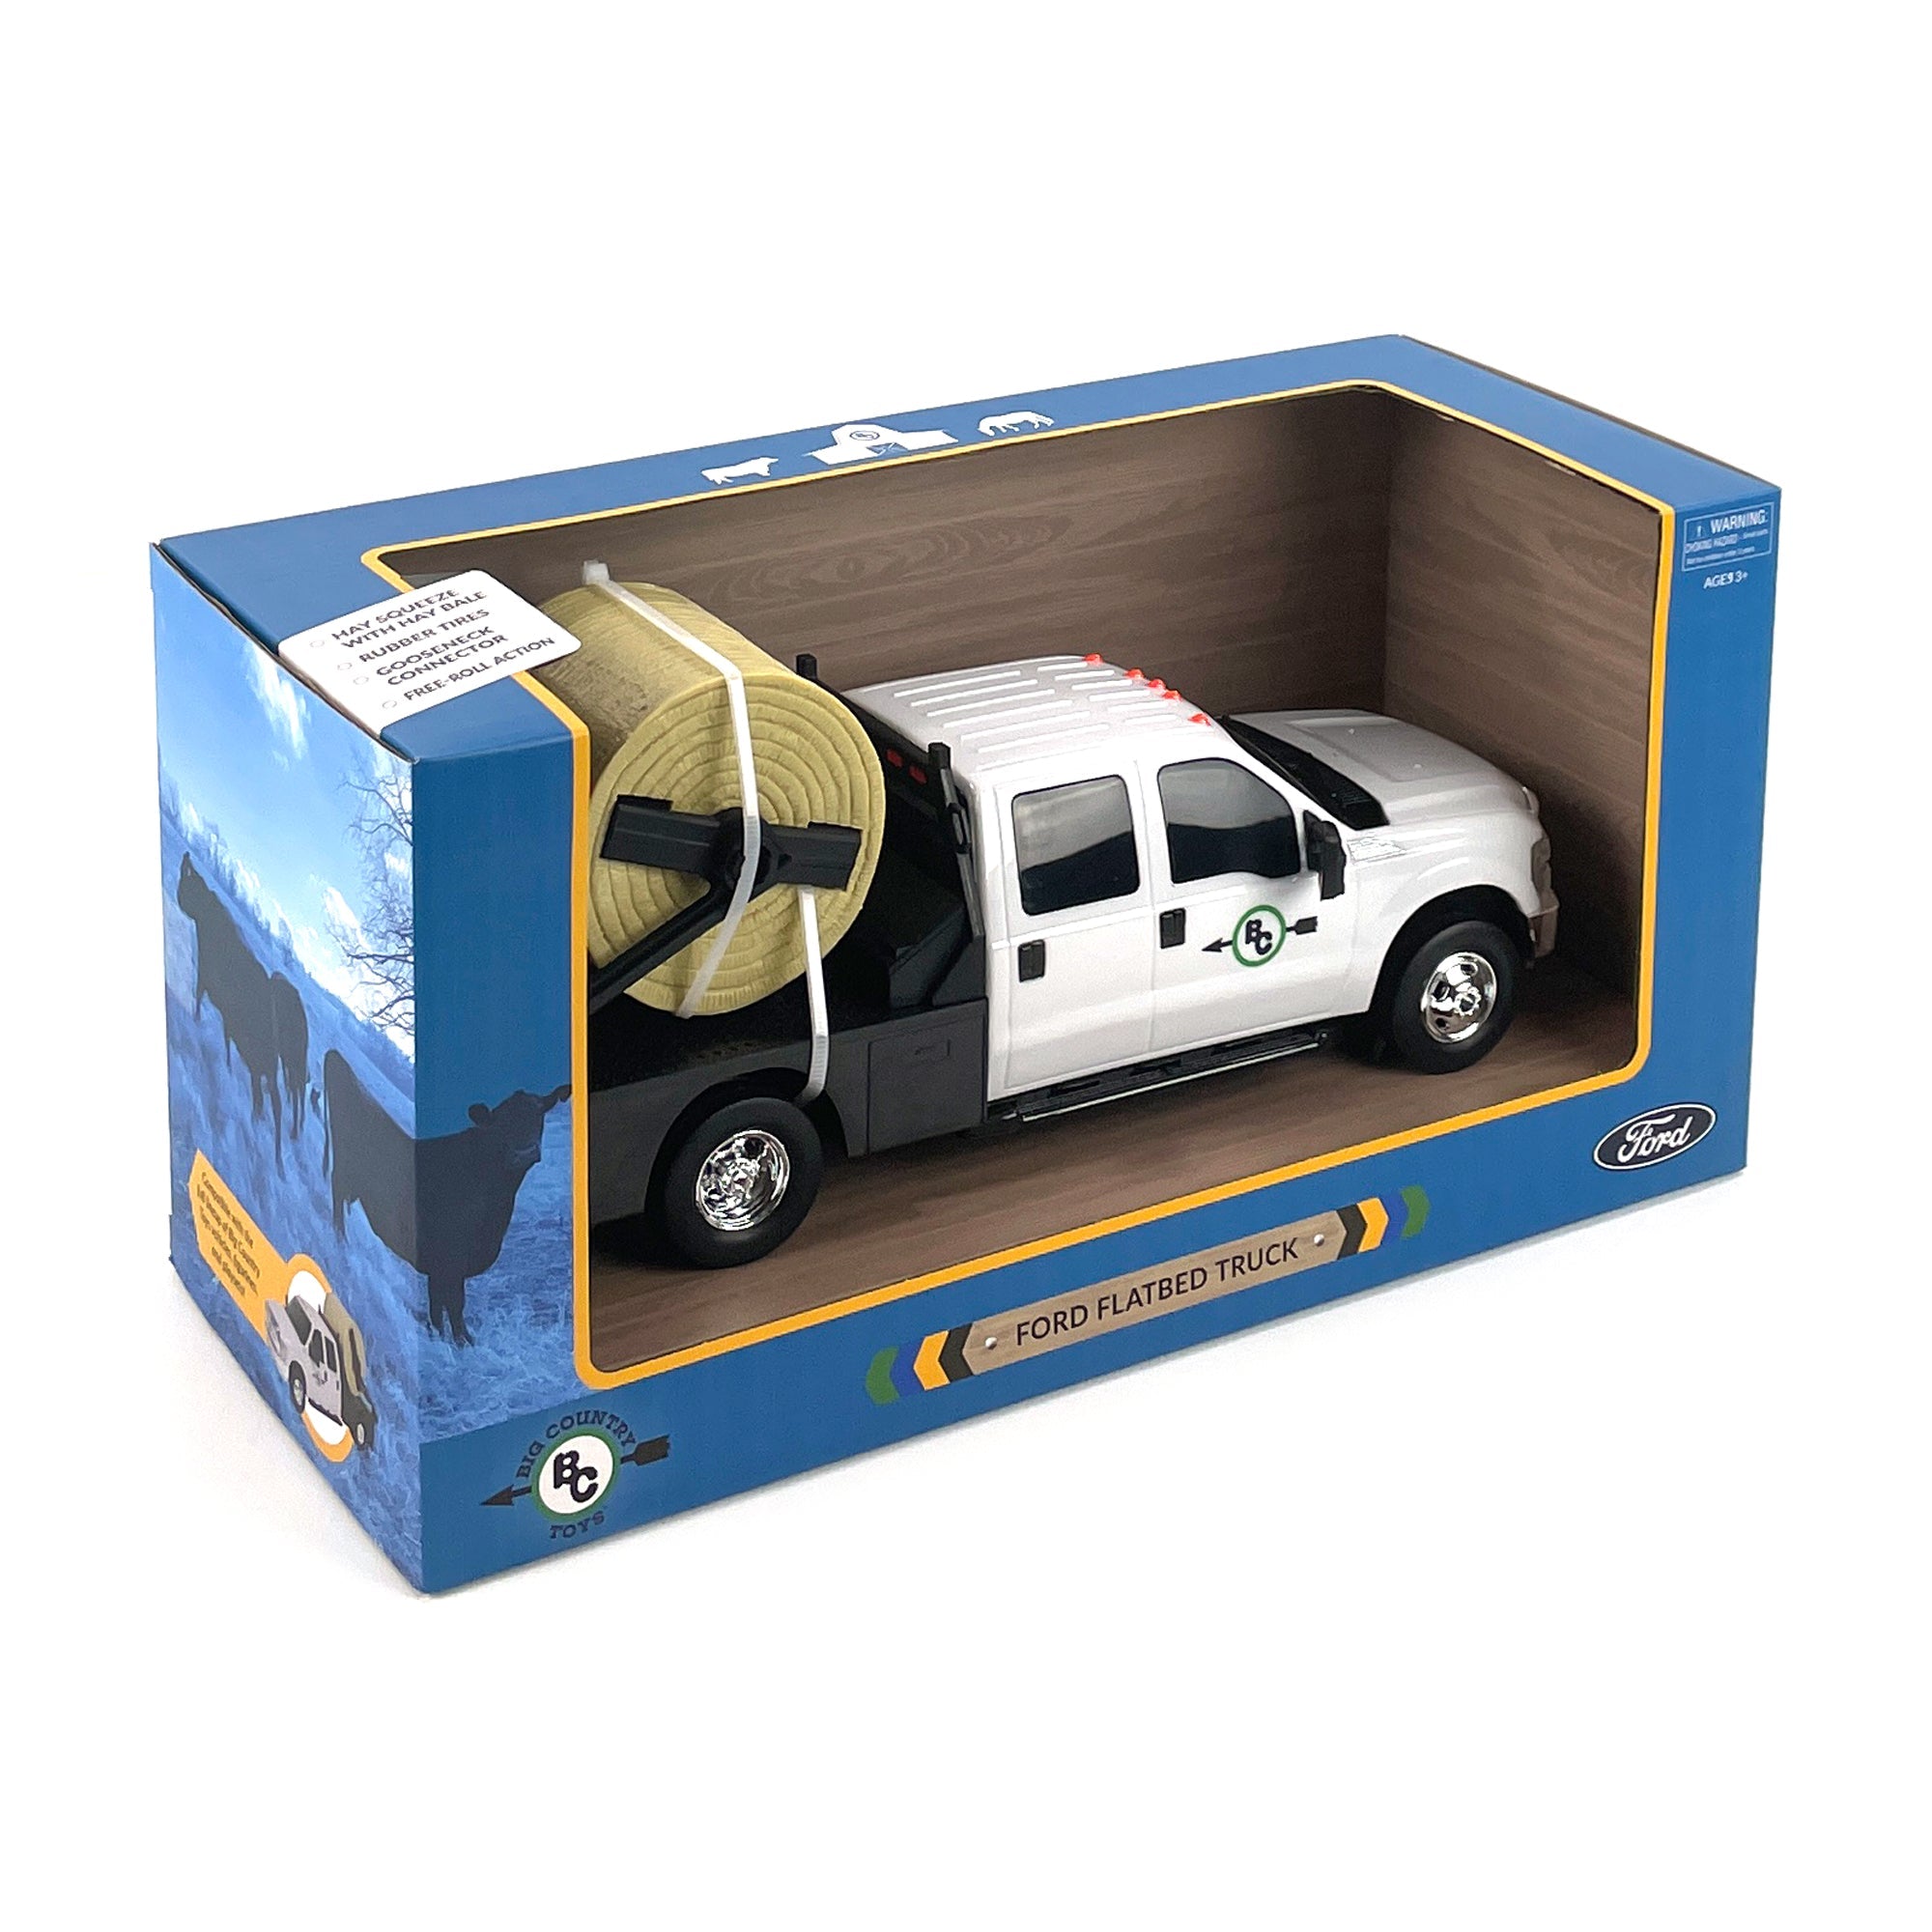 Ford Flatbed Truck | bigcountrytoys.com